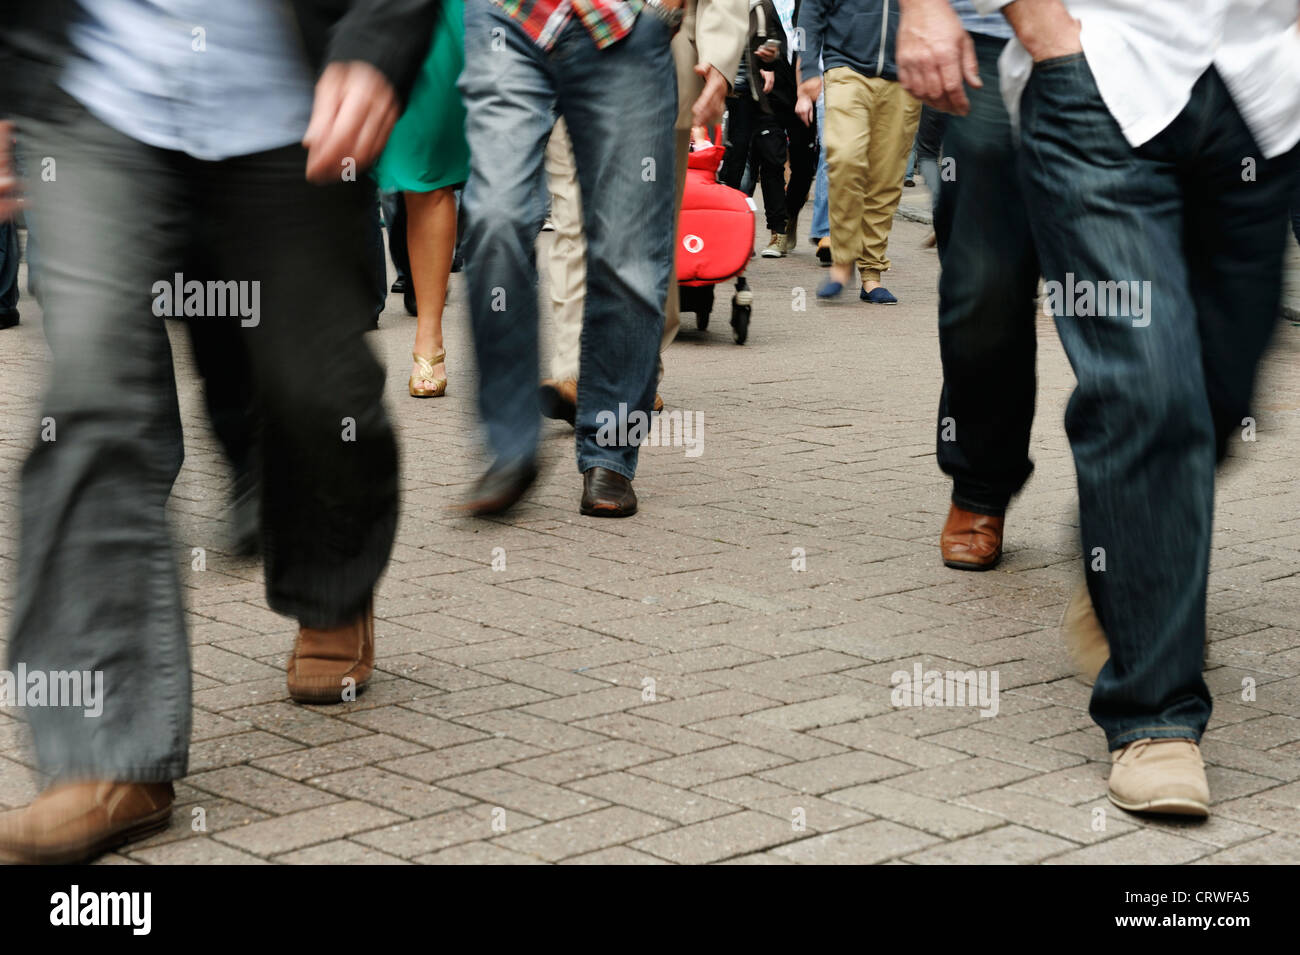 Crowds of people with motion blur Stock Photo